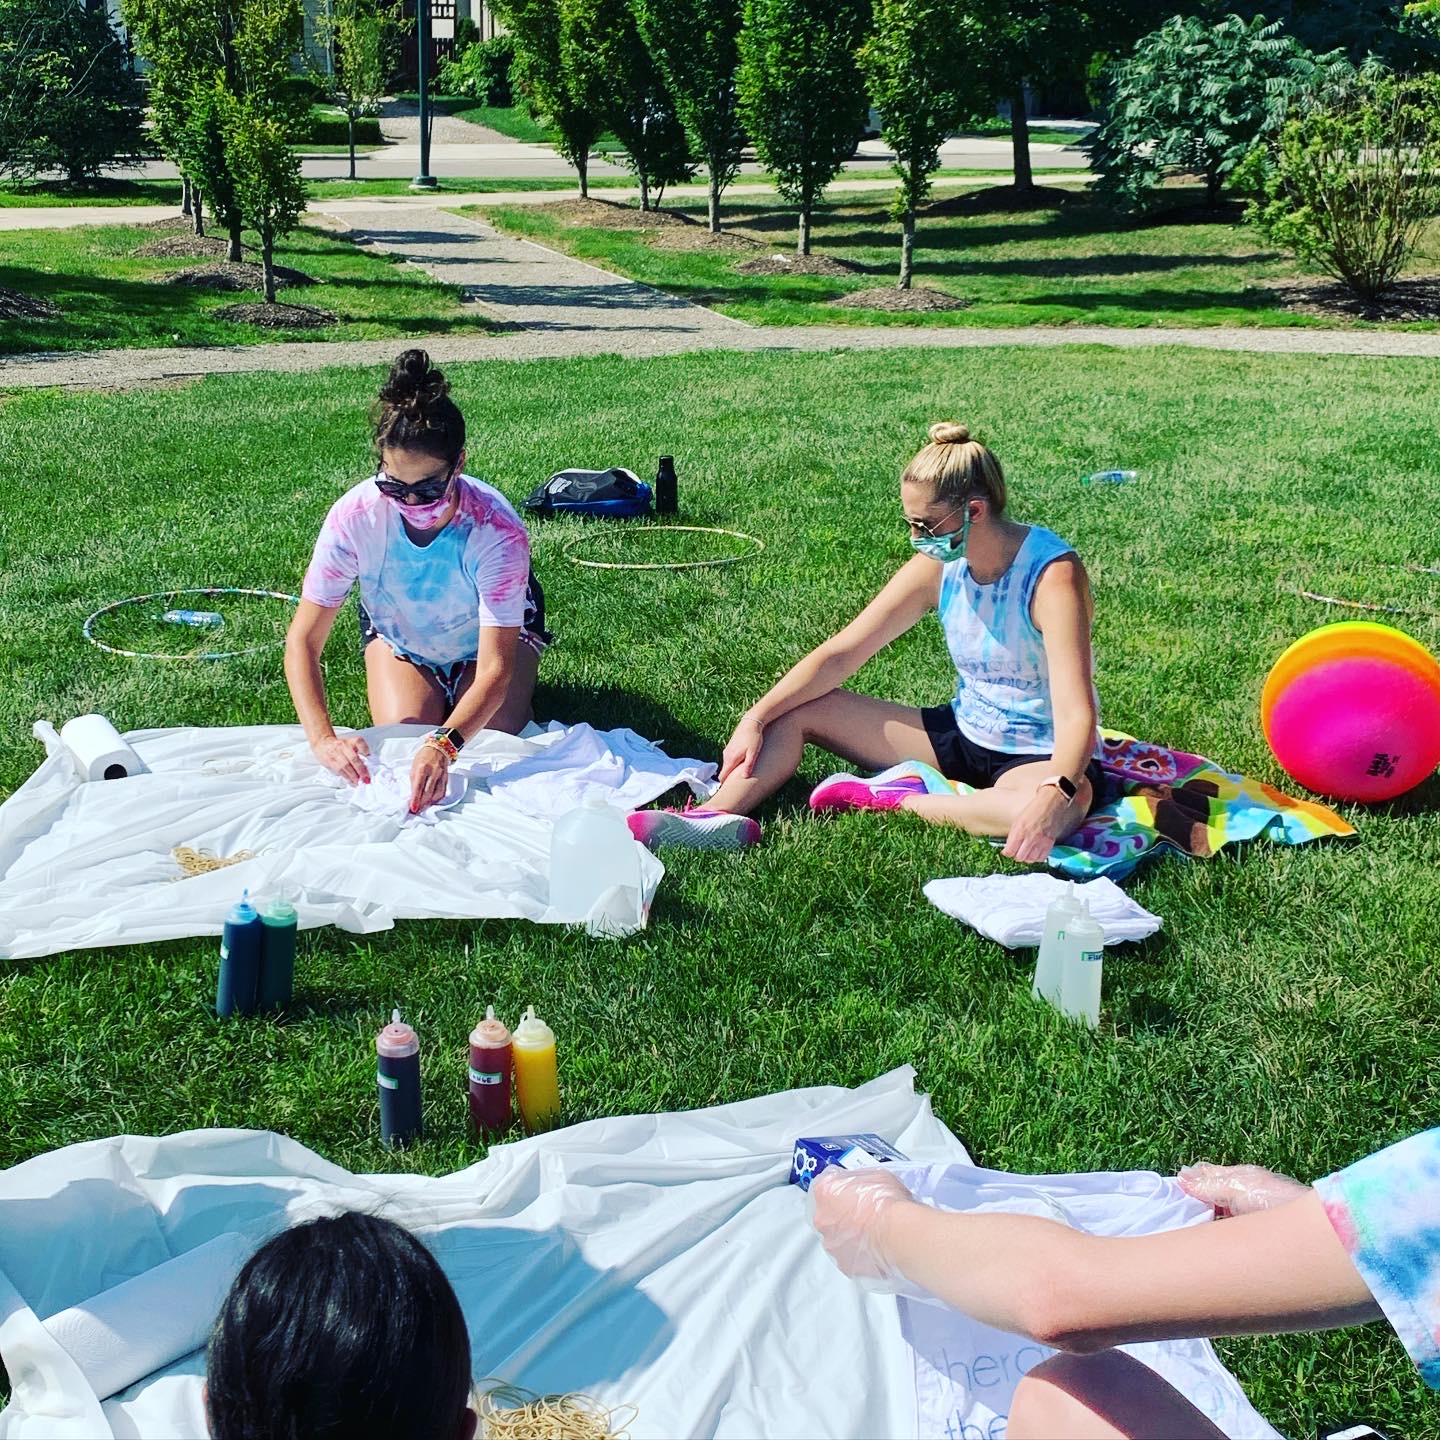 Campers tie-dye shirts in an open grass field at Camp Therapyology. We offer summer camps for teenagers in West Bloomfield, MI. Contact us to learn more about summer programs for teens and summer camp in Michigan